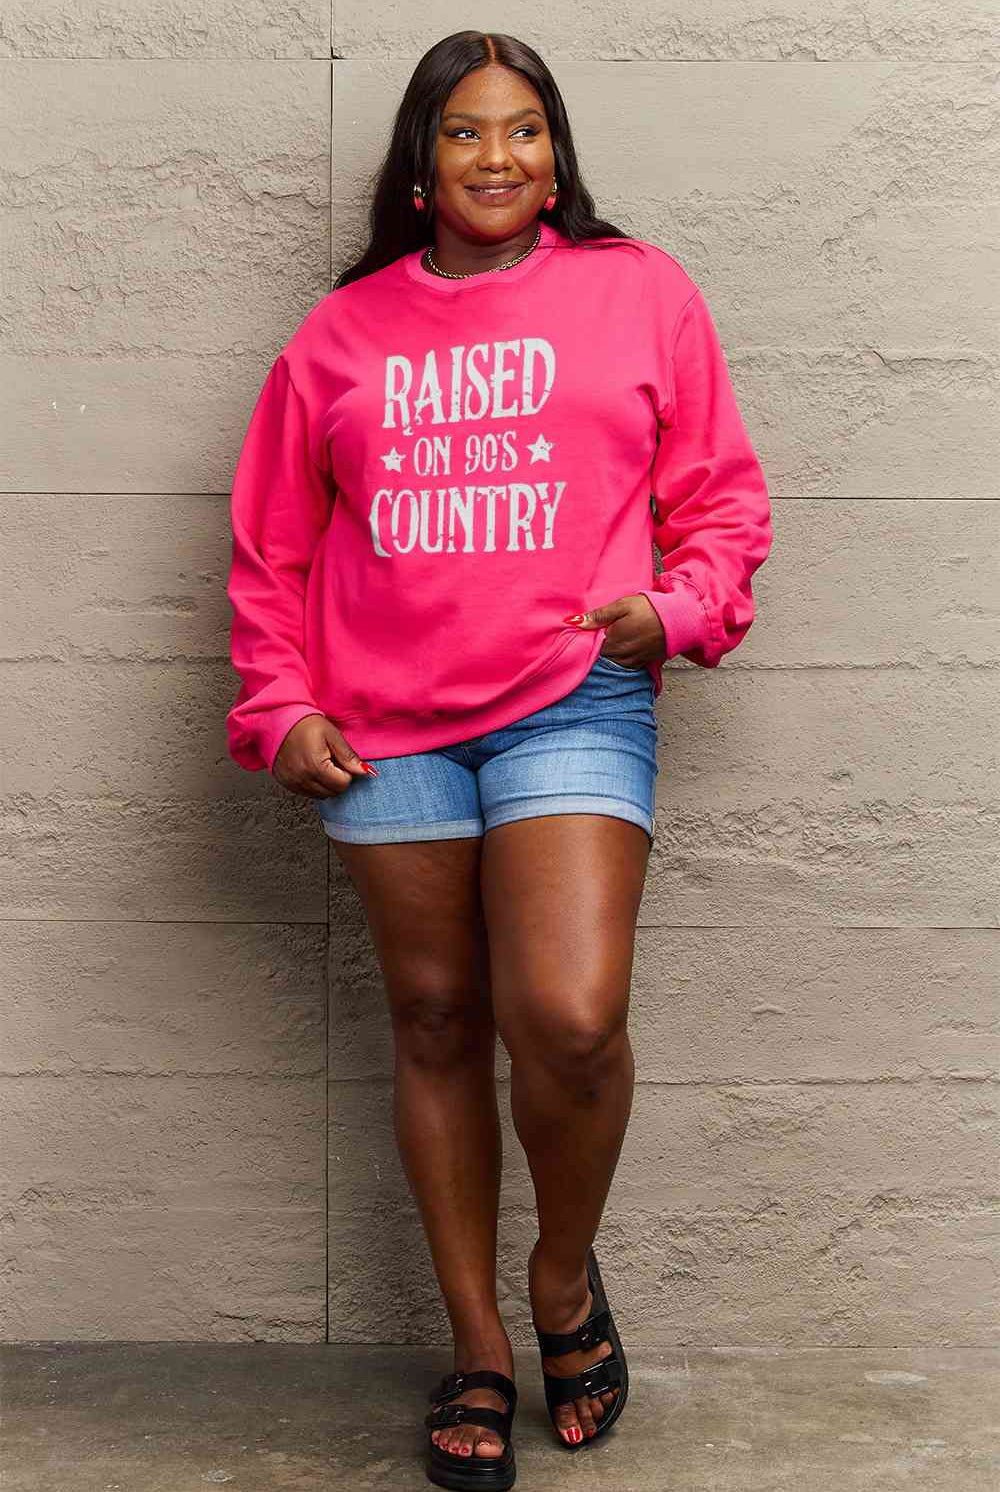 Simply Love Full Size RAISED ON 90'S COUNTRY Graphic Sweatshirt - GemThreads Boutique